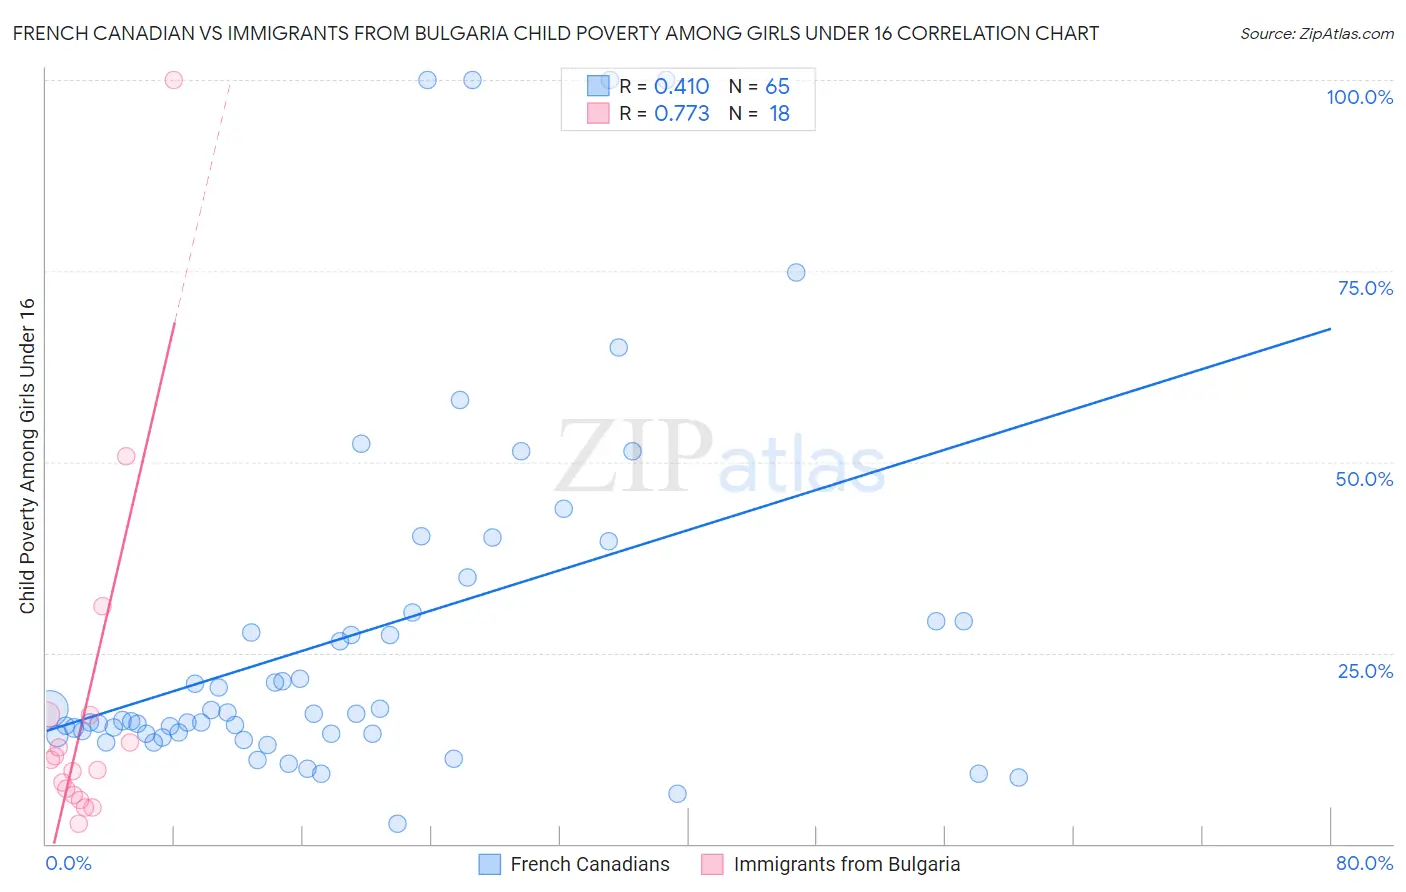 French Canadian vs Immigrants from Bulgaria Child Poverty Among Girls Under 16